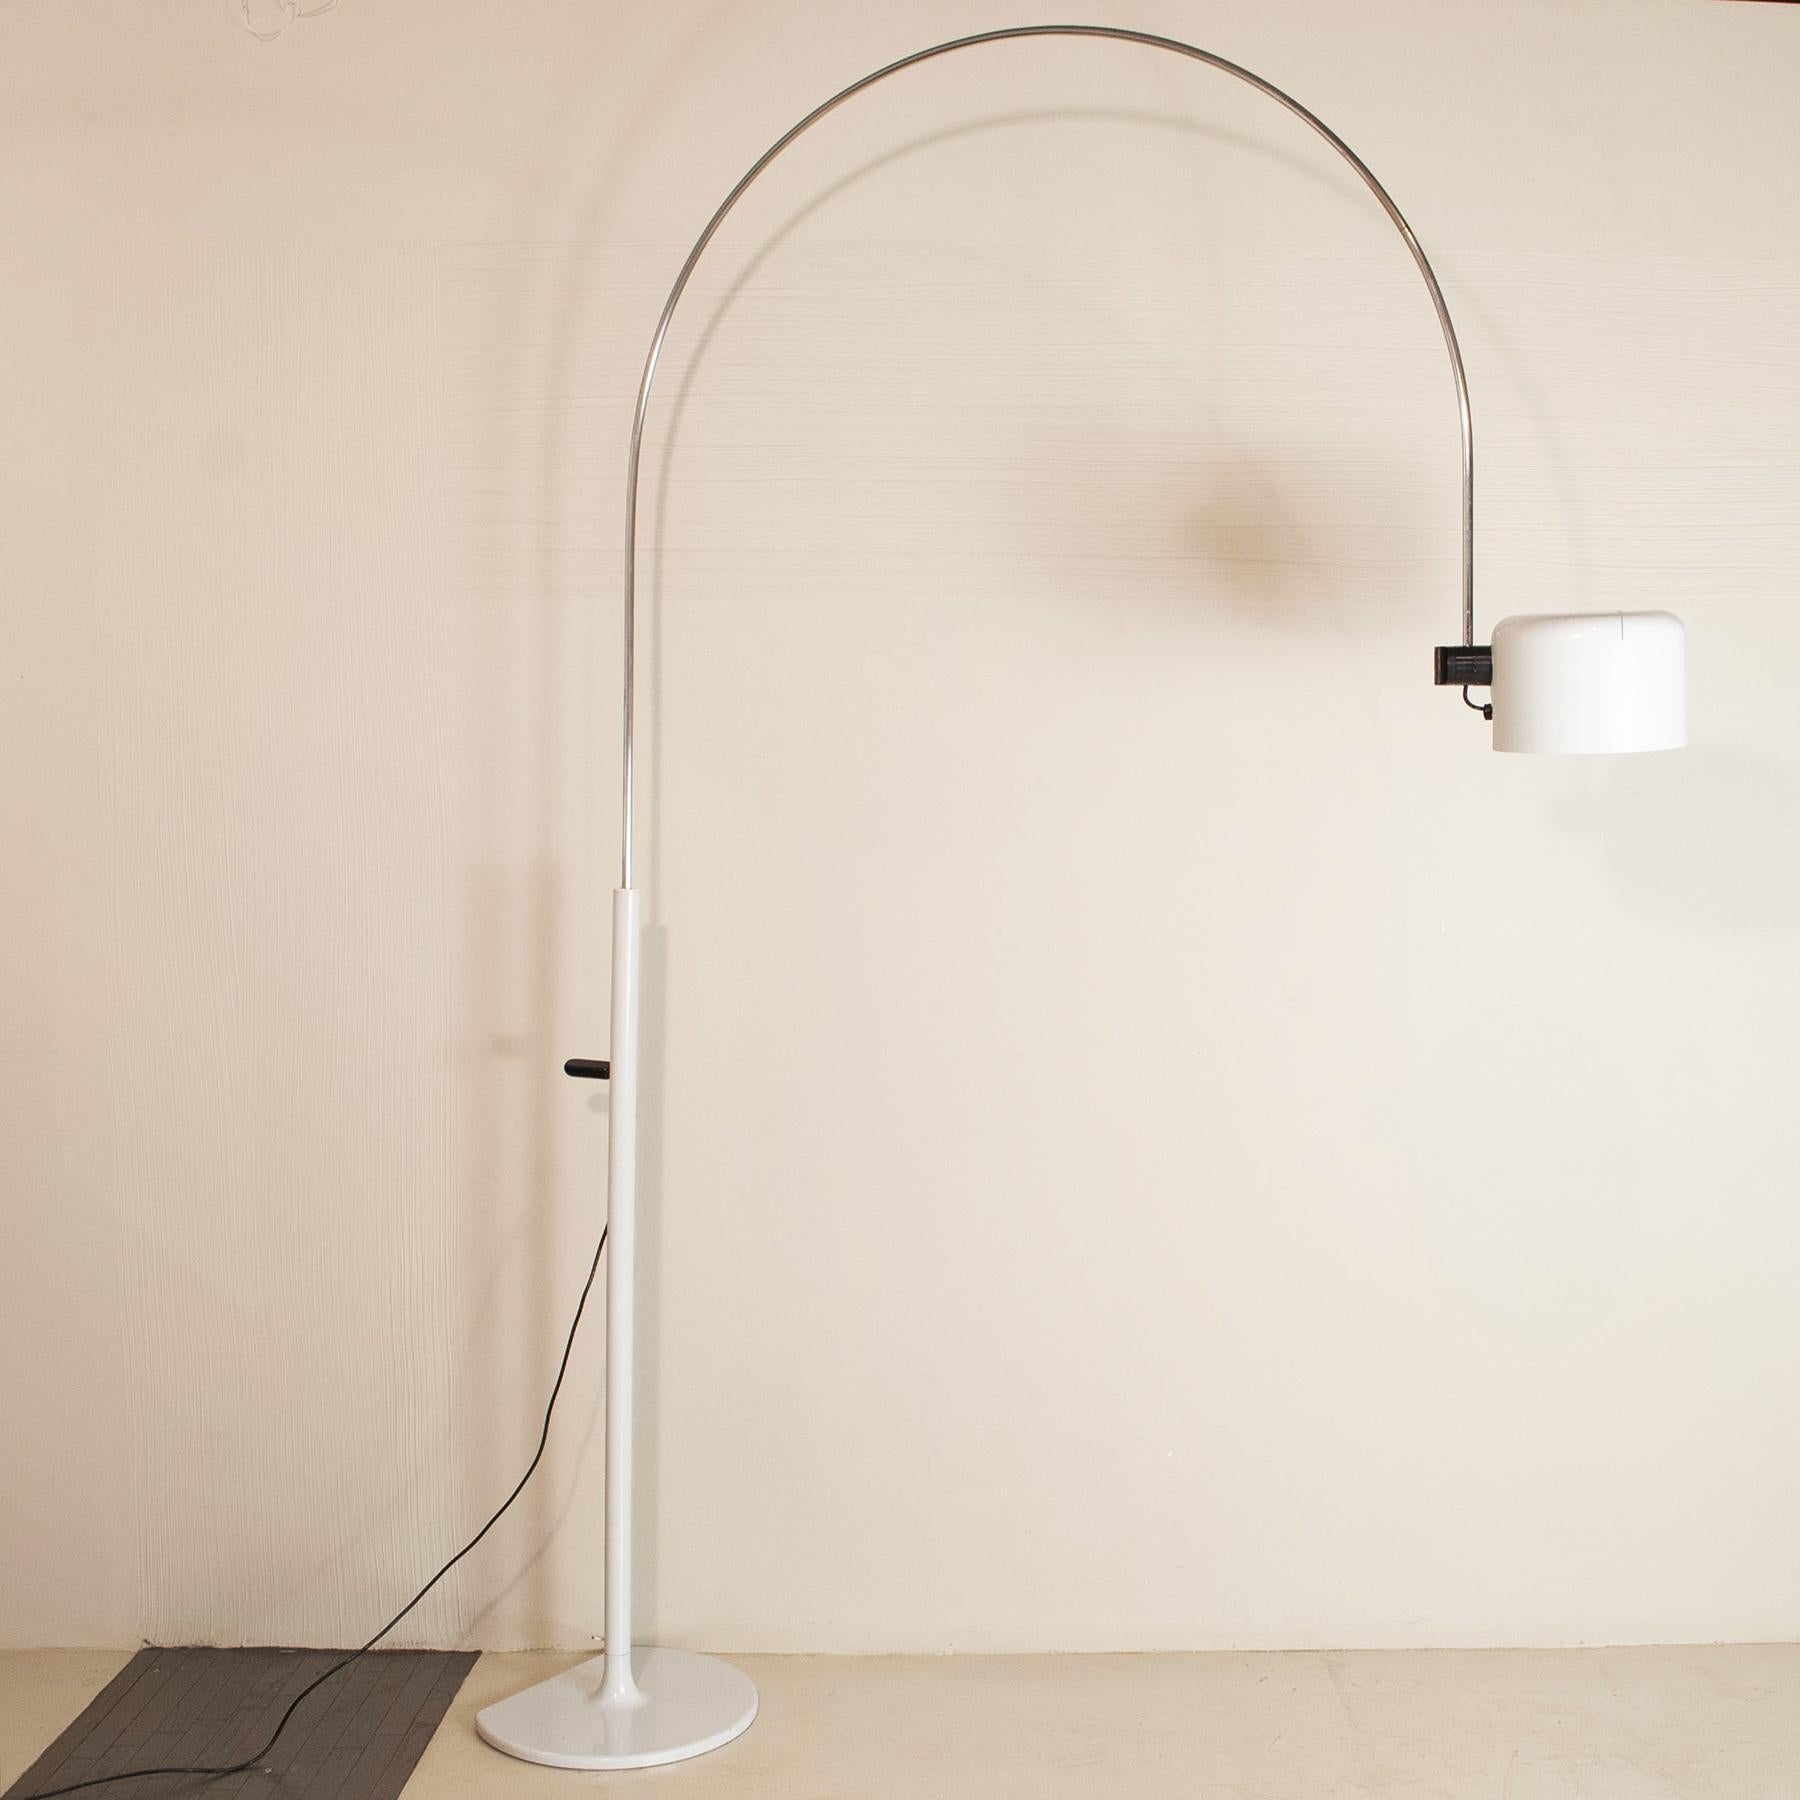 Floor lamp with direct light. Telescopic stem and base in white chromed metal designed by Joe Colombo for Oluce in the early 70s.

Joe Colombo was born in Milan in 1930, a Milanese designer and architect, the son of an industrialist. After attending